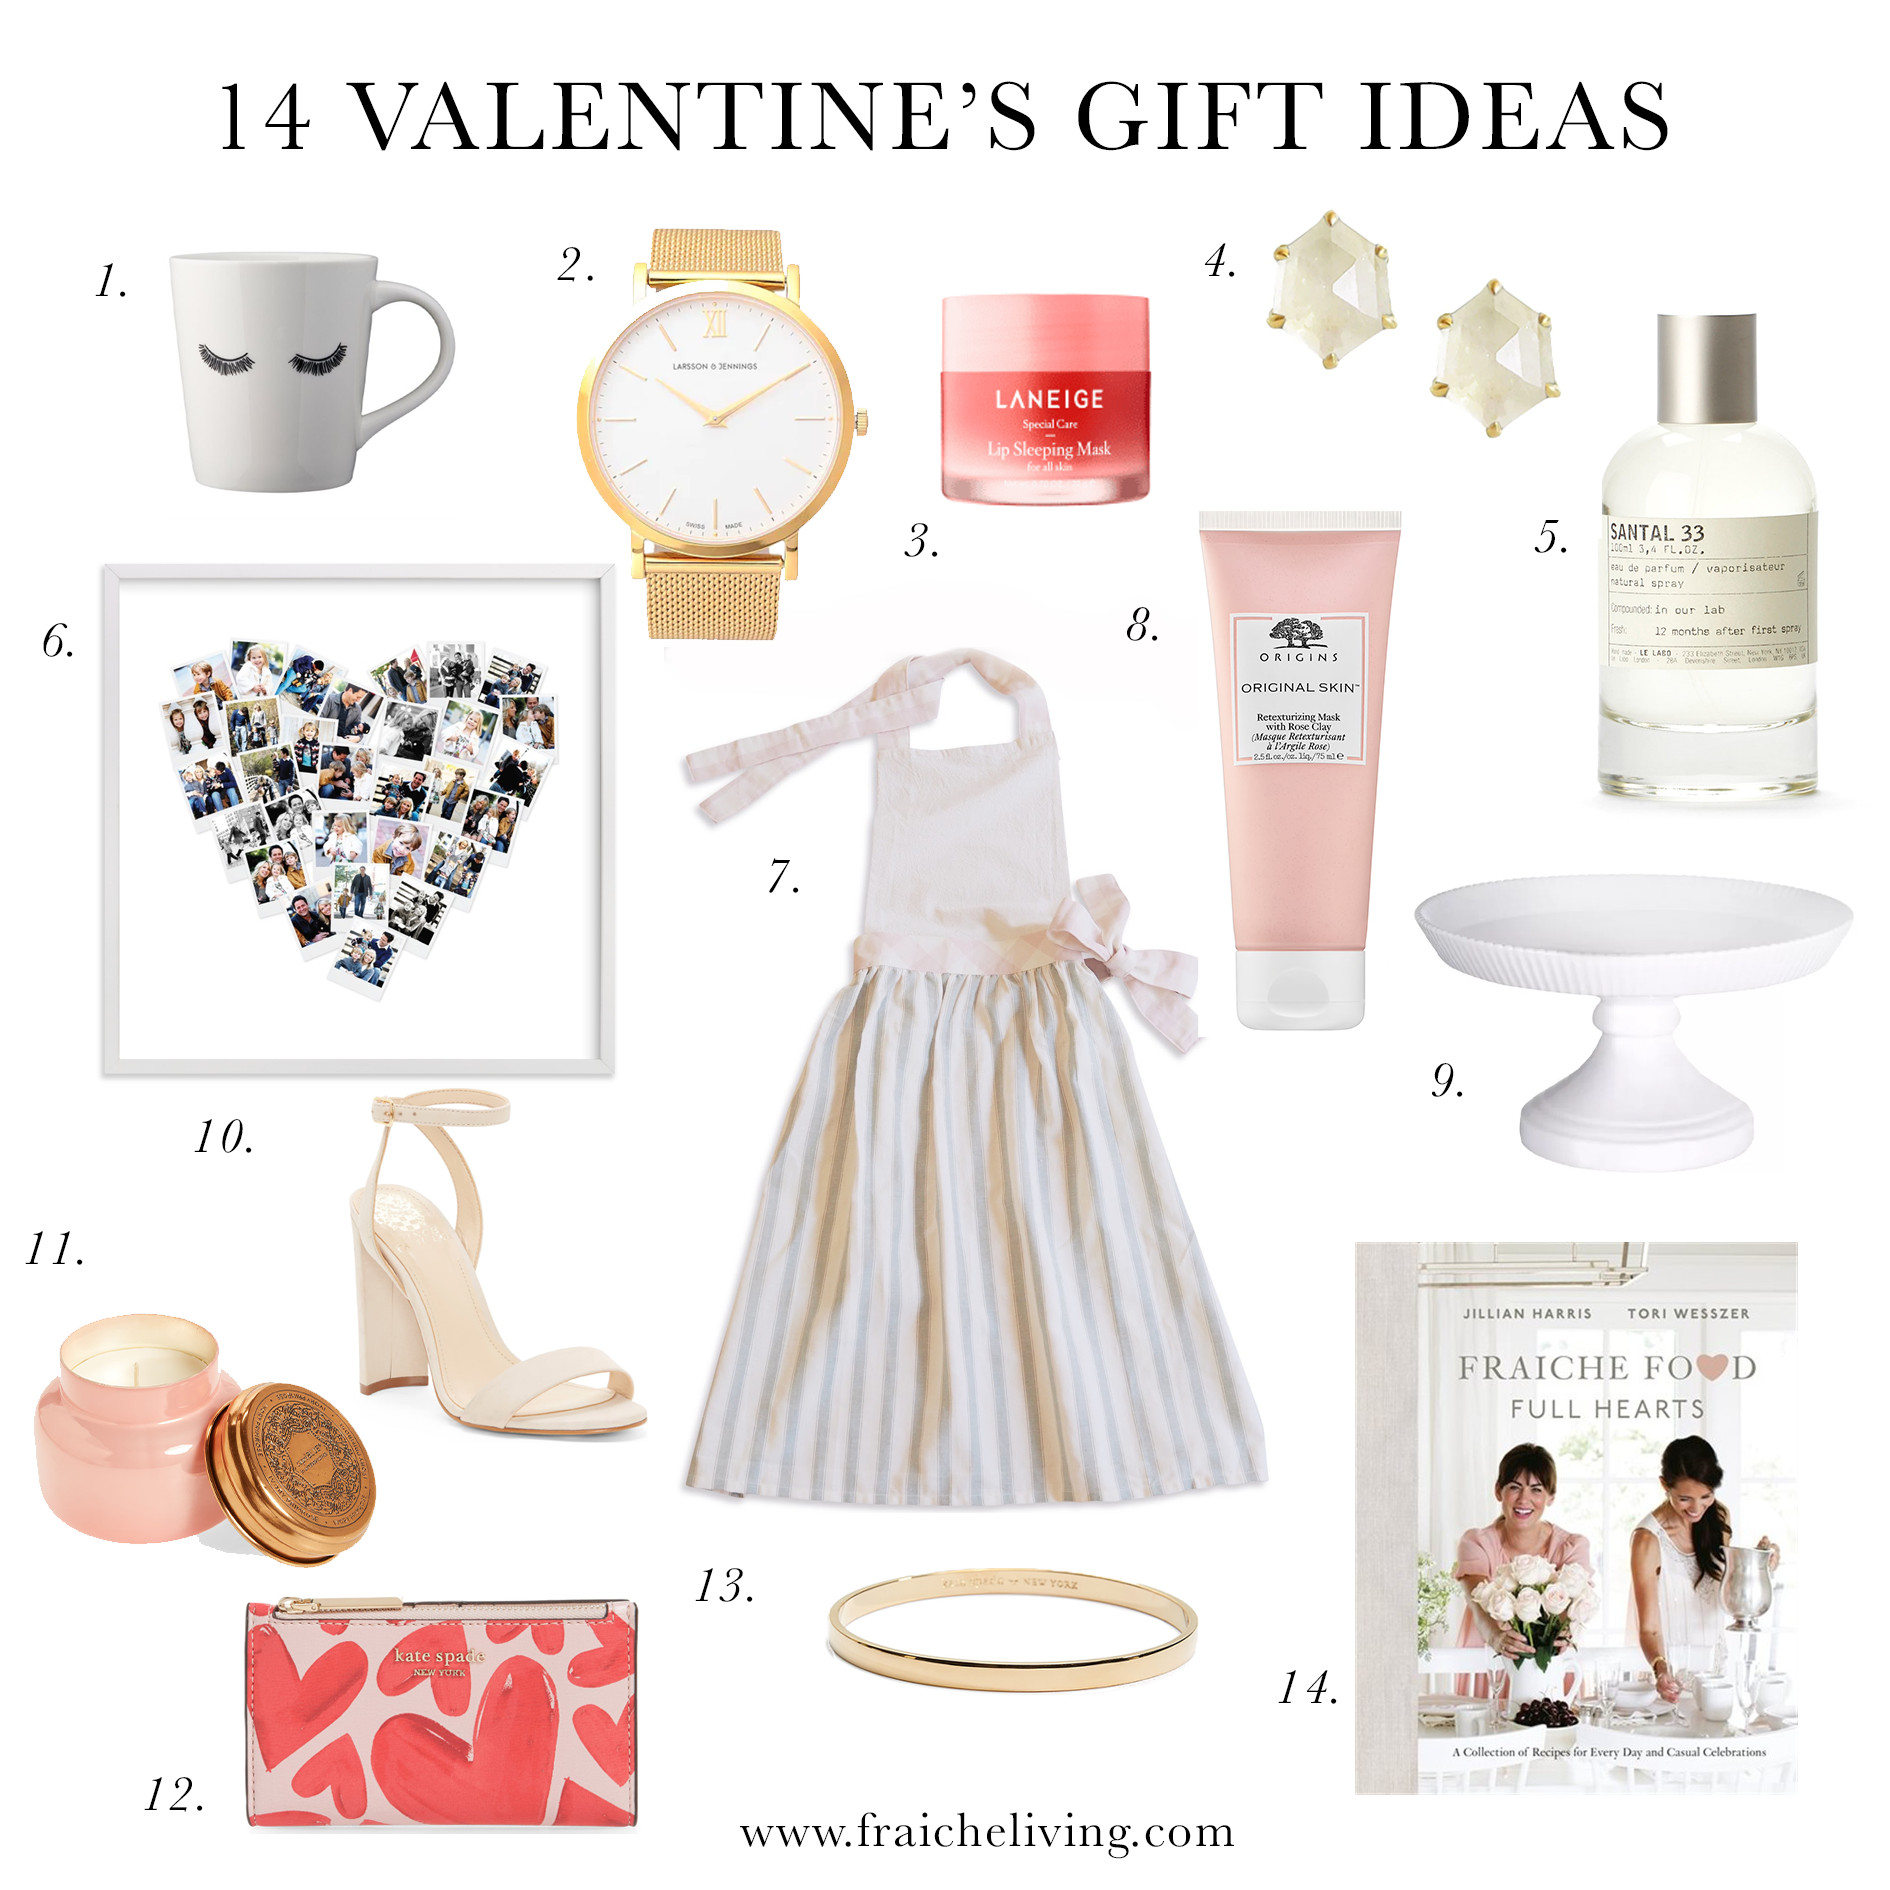 Valentine 2020 Gift Ideas
 14 Valentine s Day Gift Ideas in 2020 With images